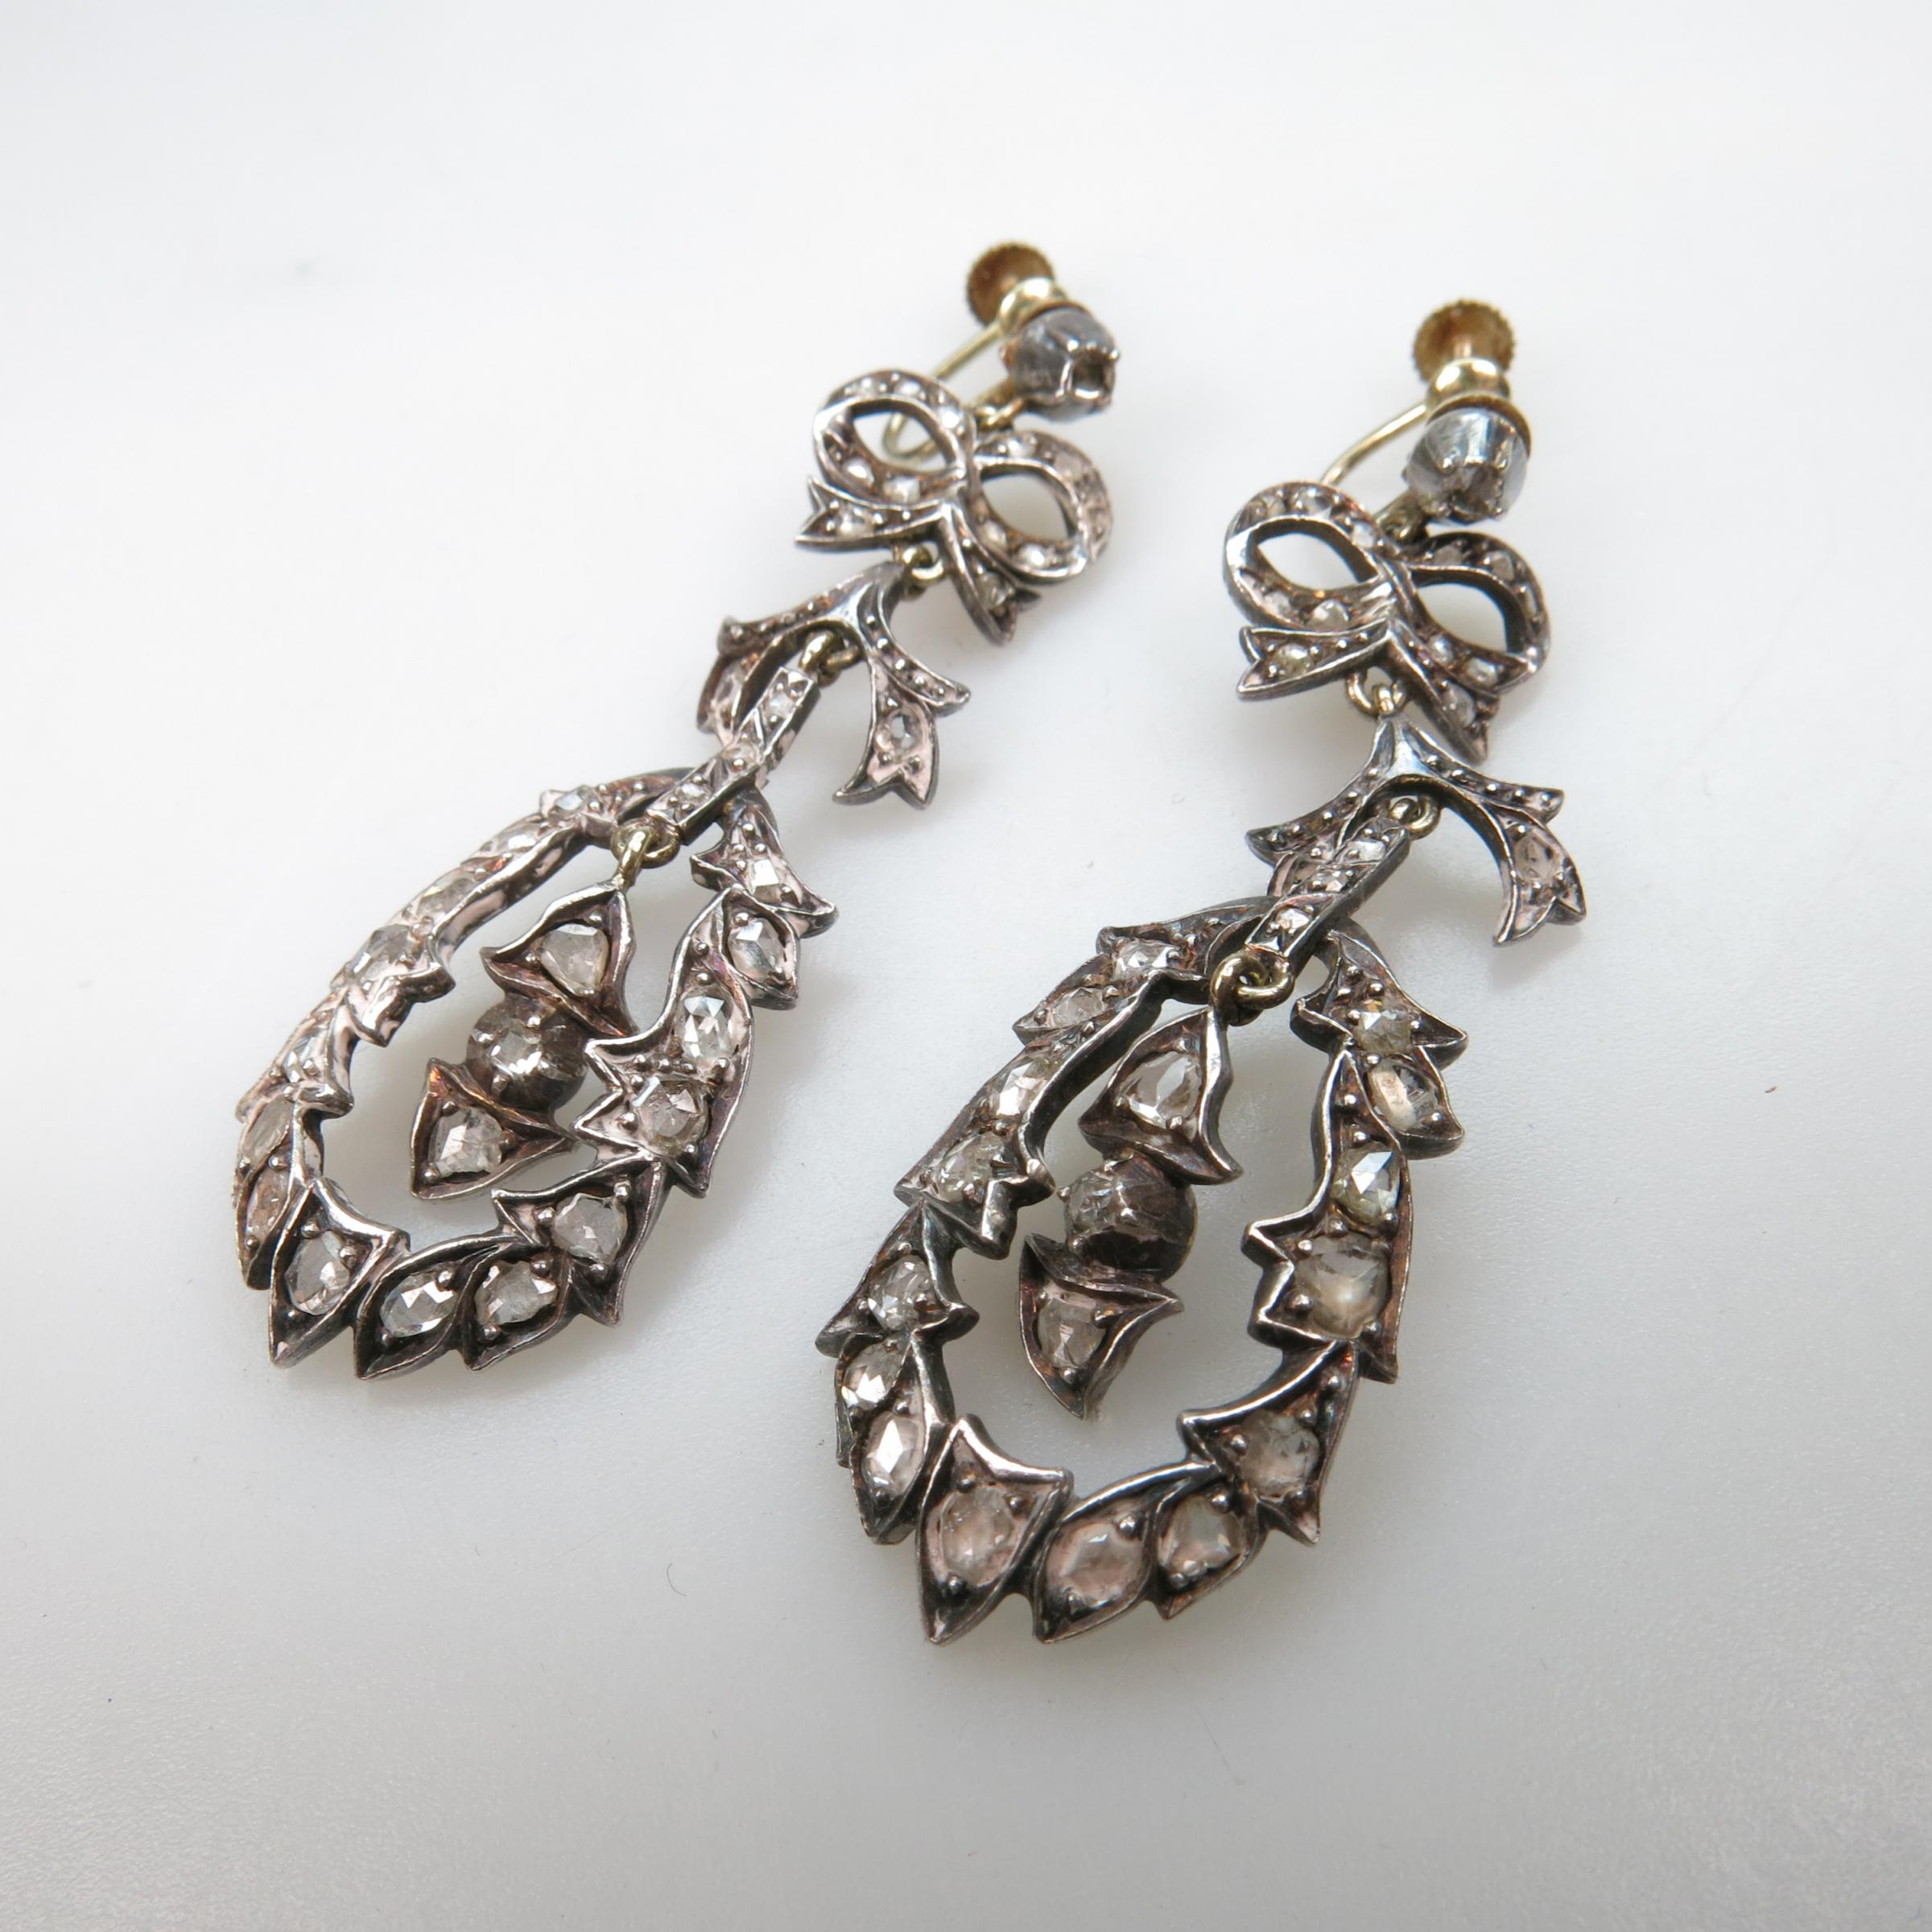 Pair Of Silver And 14k Yellow Gold Screw-Back Drop Earrings